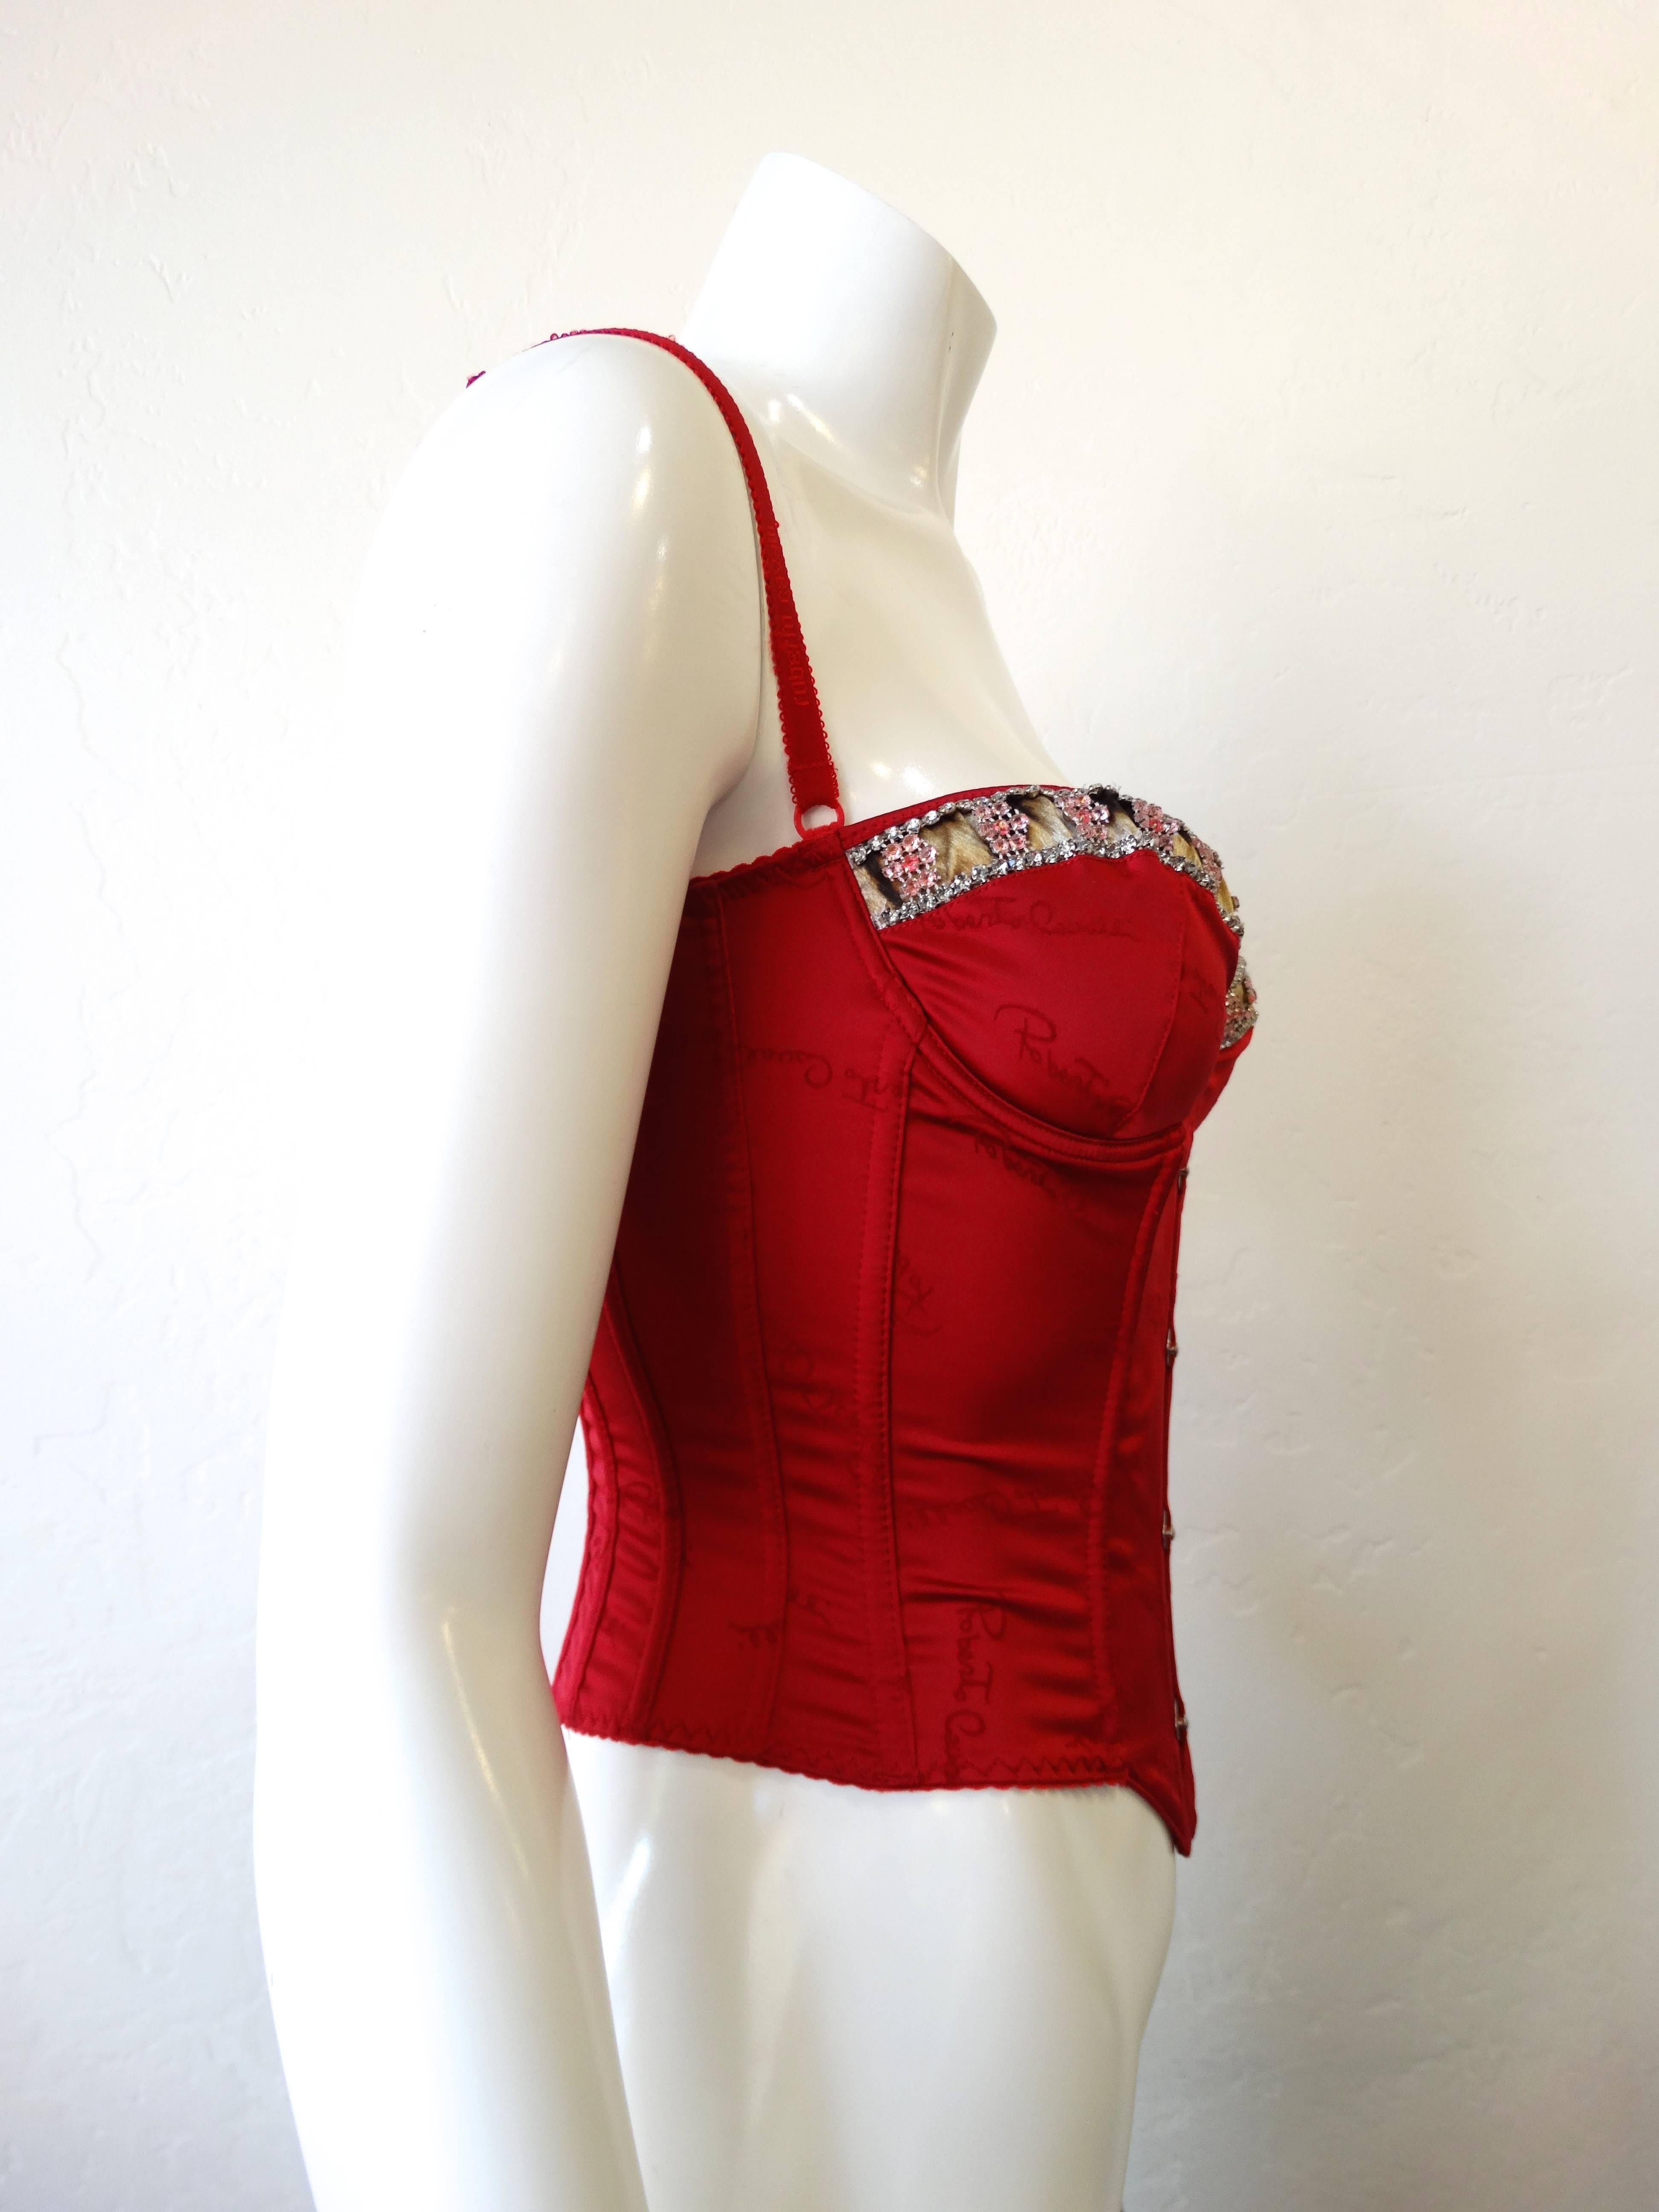 Channel your inner Moulin Rouge in our amazing Roberto Cavalli bustier! Made of a silky red stretch satin accented with leopard on the cups. Pink and clear diamante rhinestones all along the tops of the cups. Super adjustable fit, straps can adjust